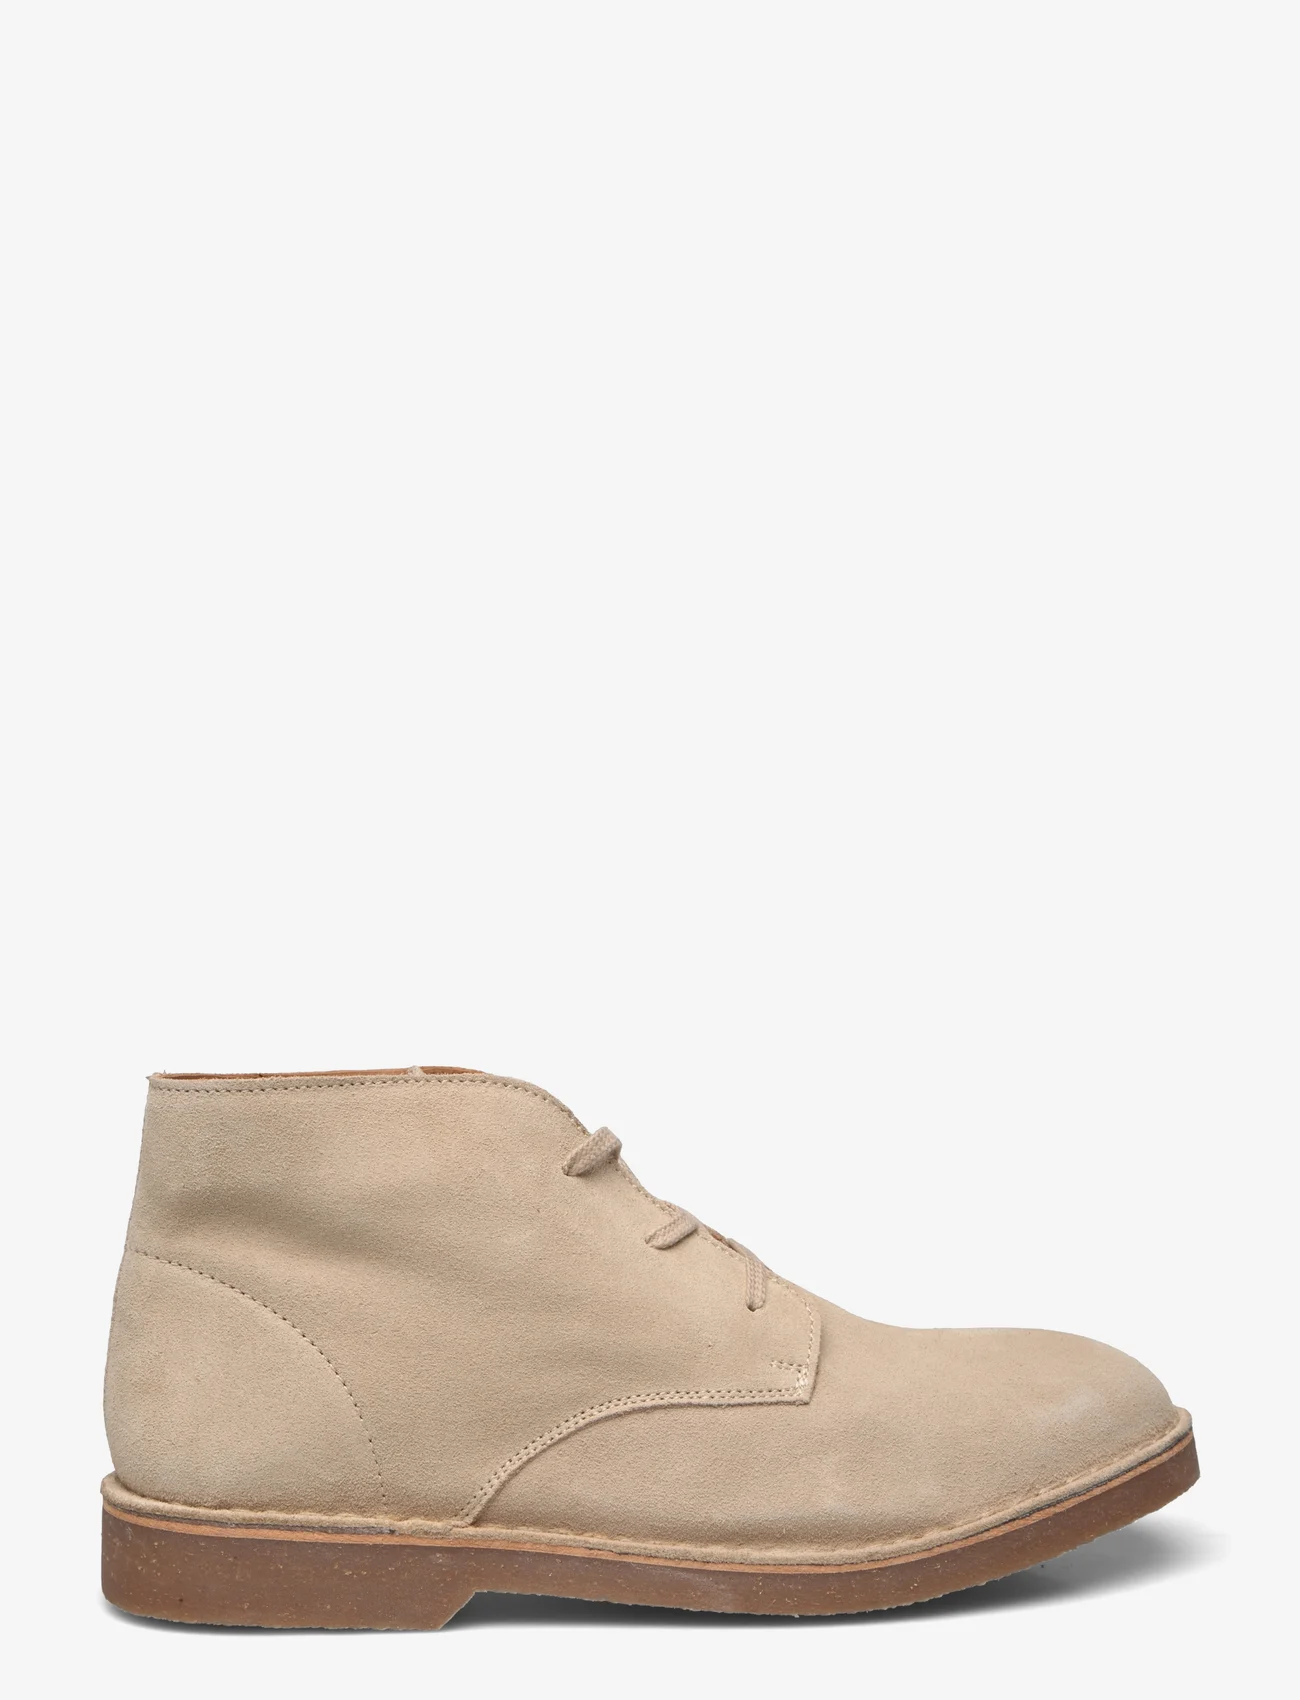 Selected Homme - SLHRIGA NEW SUEDE CHUKKA BOOT B - aavikkokengät - oatmeal - 1